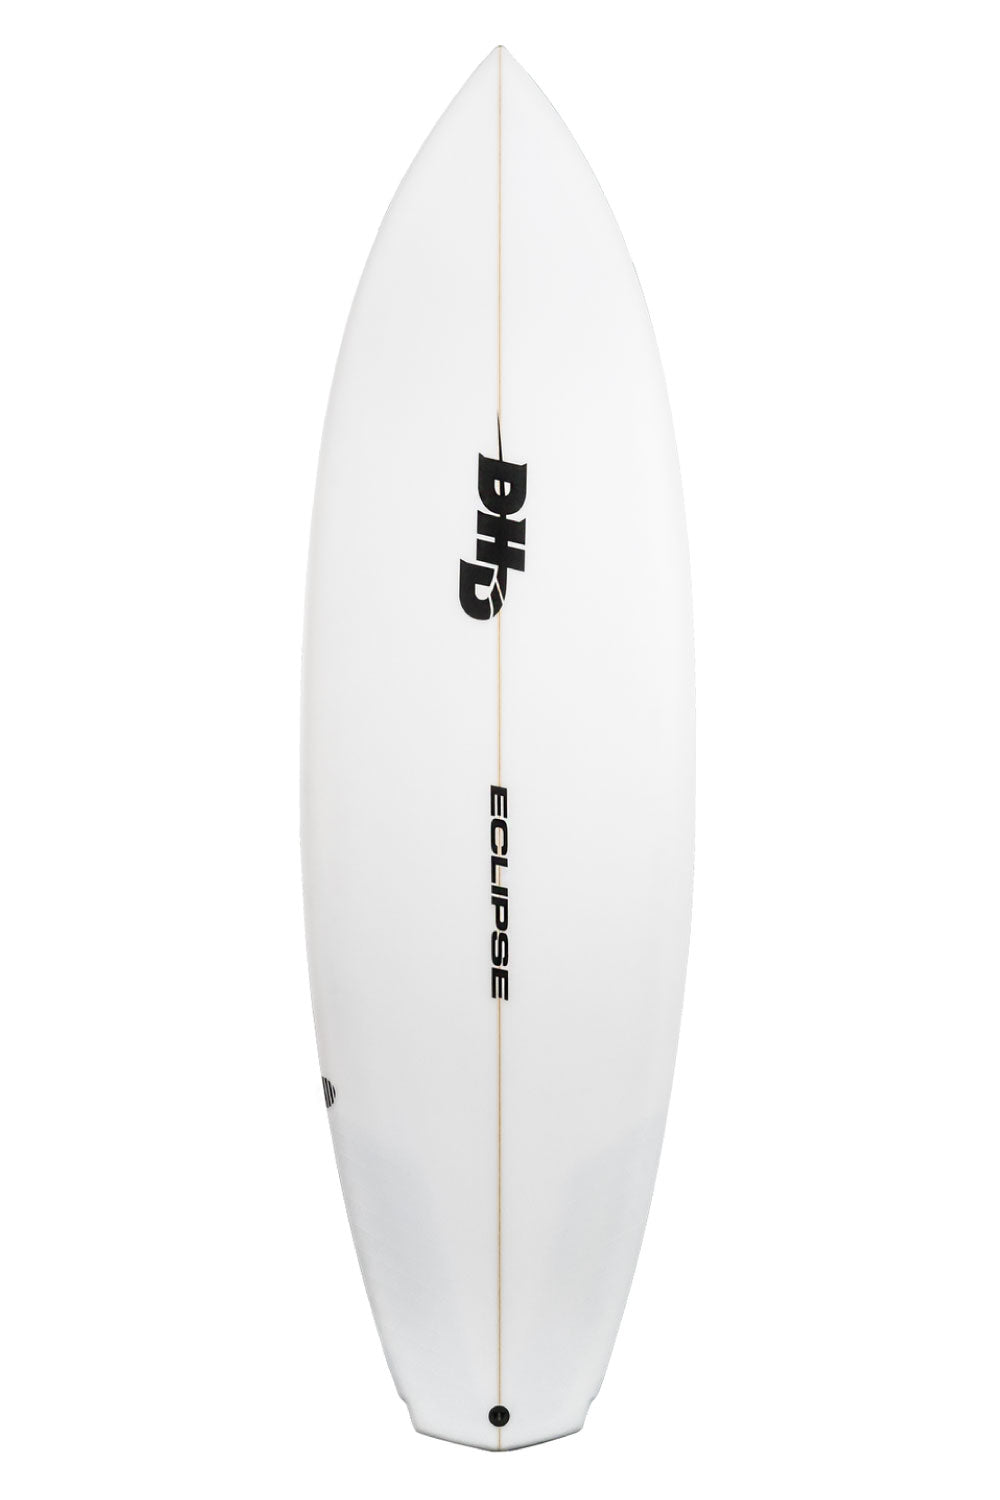 DHD MF Eclipse Surfboard